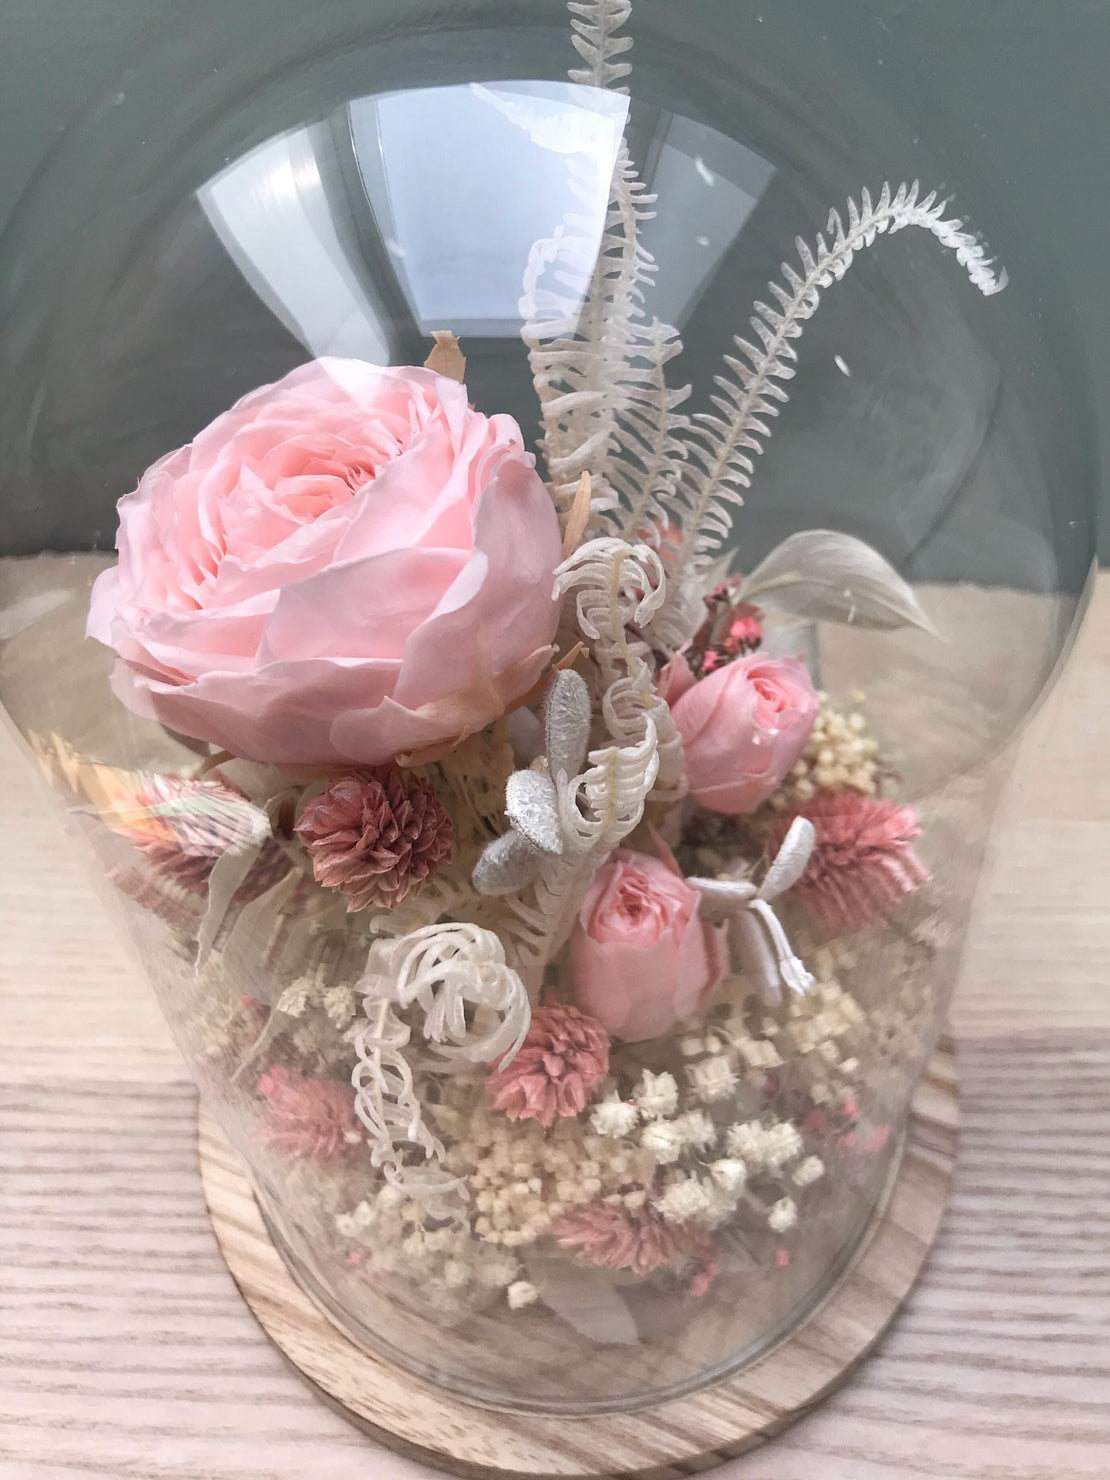 Dried flower bell with pink stabilized English rose